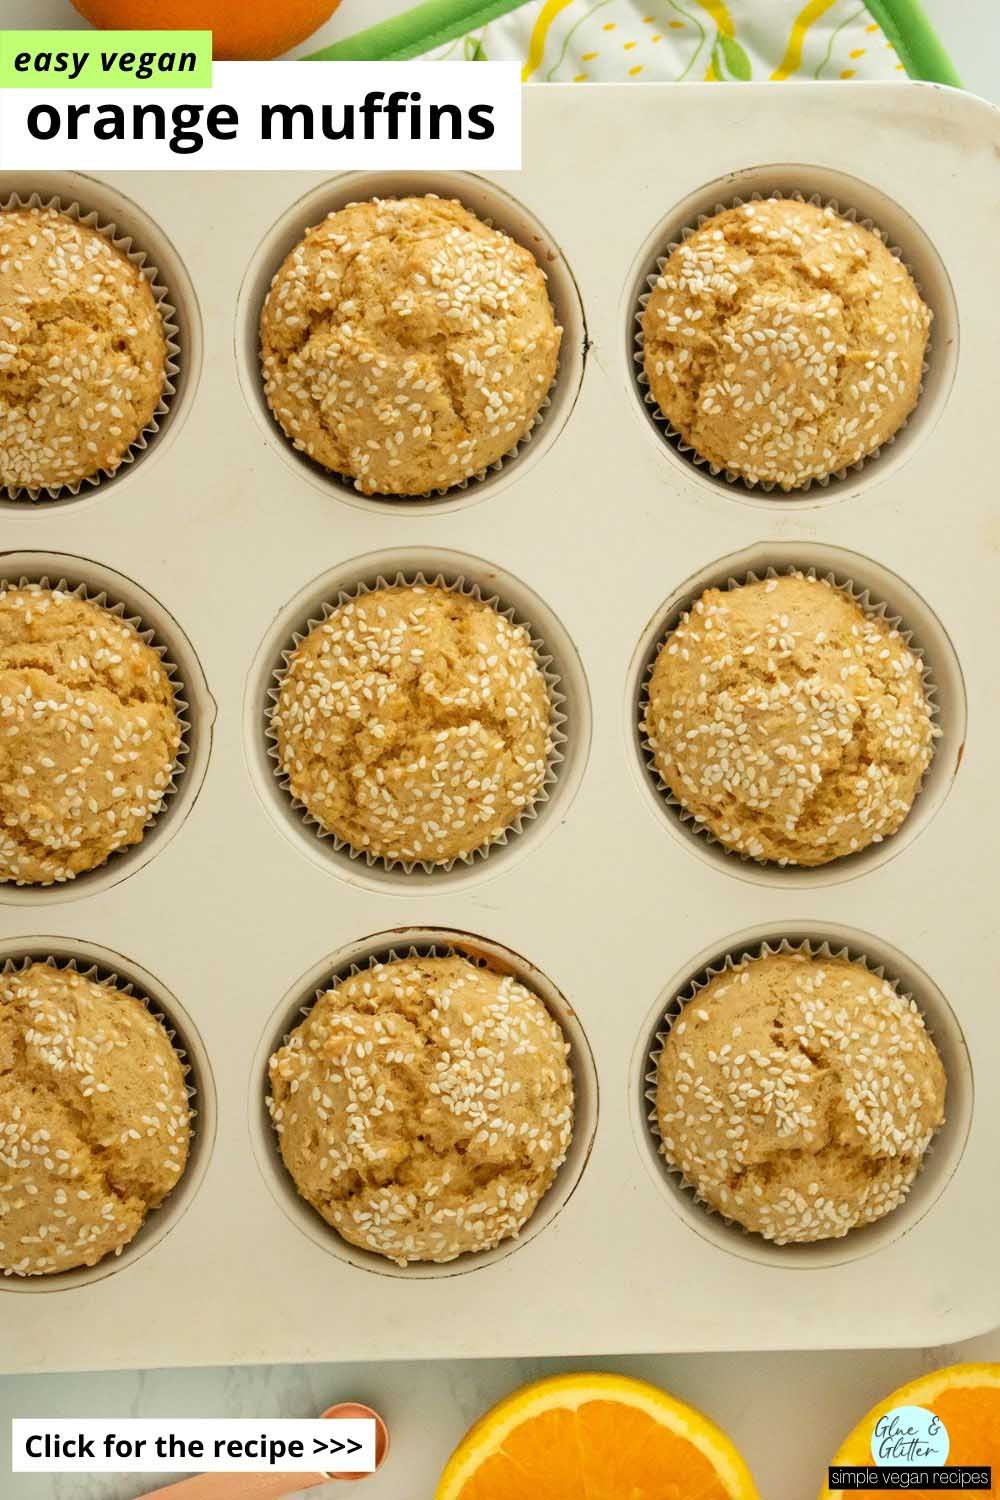 close-up of vegan orange muffins in the baking pan after baking, text overlay